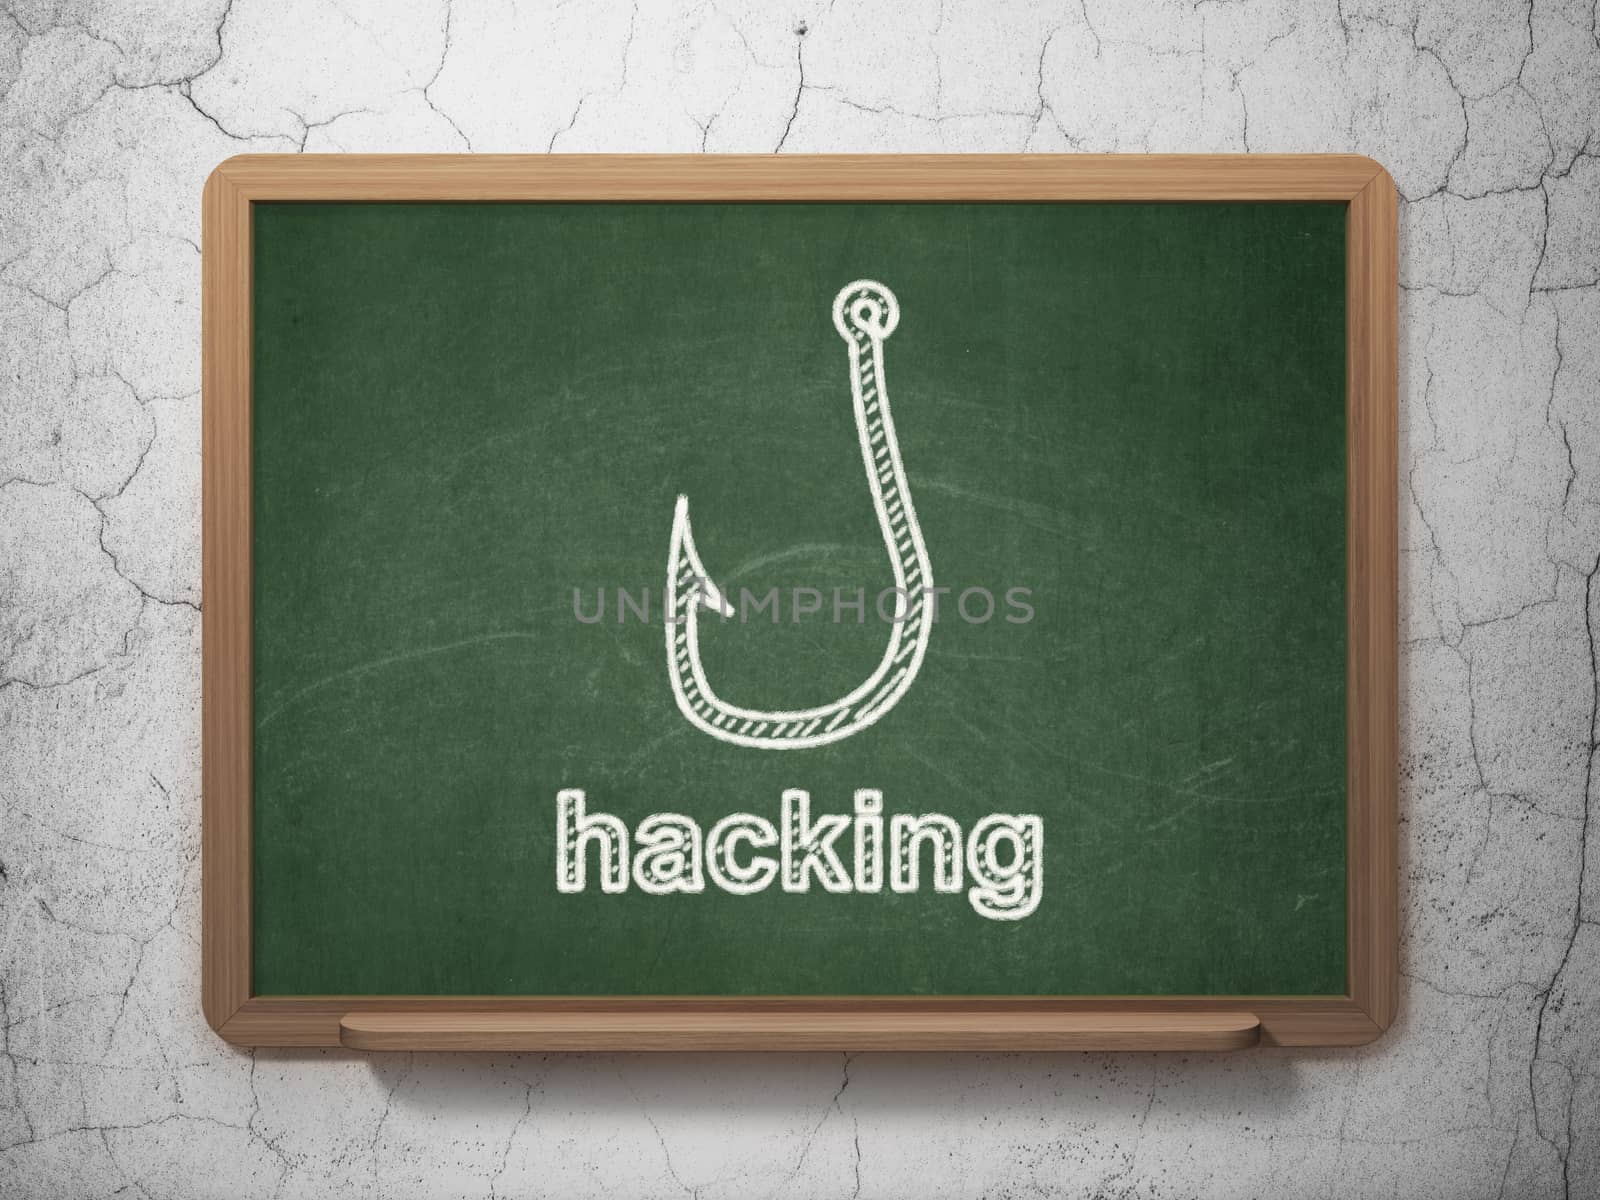 Protection concept: Fishing Hook icon and text Hacking on Green chalkboard on grunge wall background, 3d render